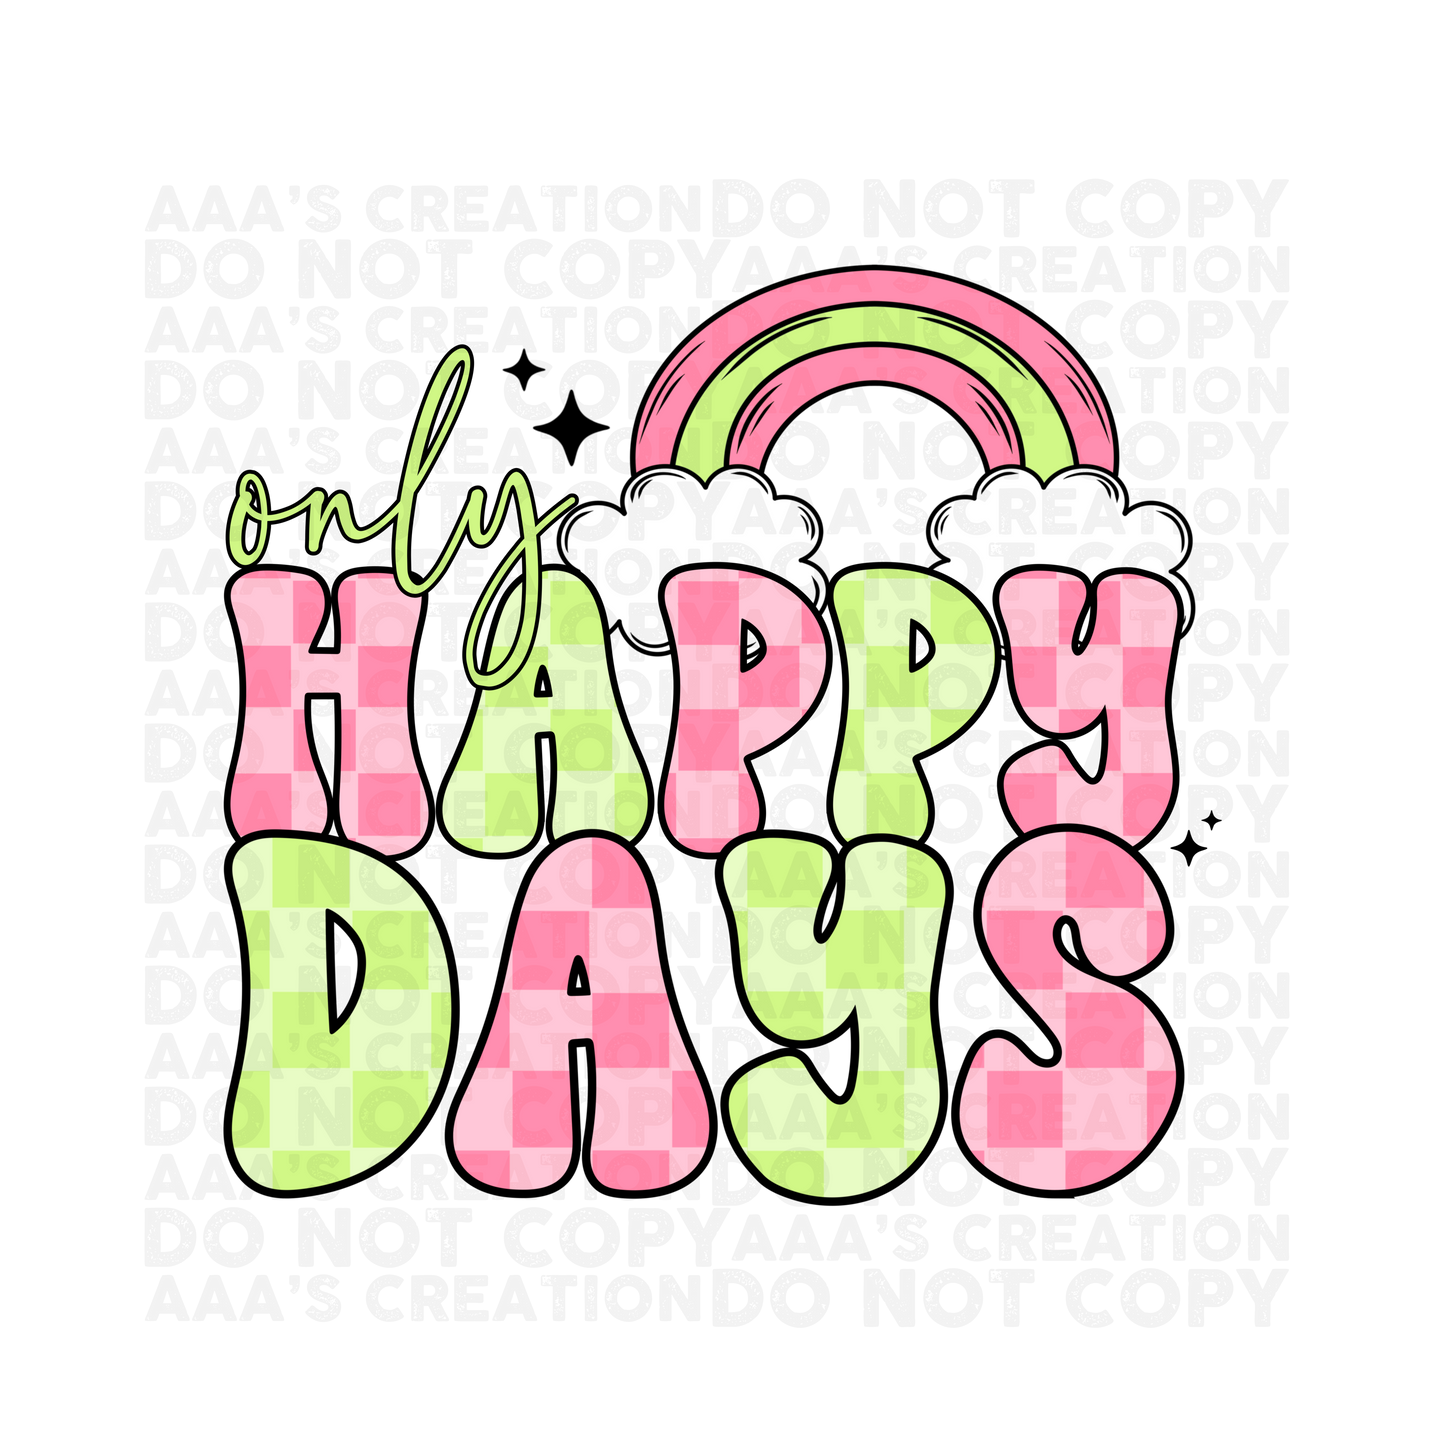 Only Happy Days Decal - Positive Thoughts & Rainbow